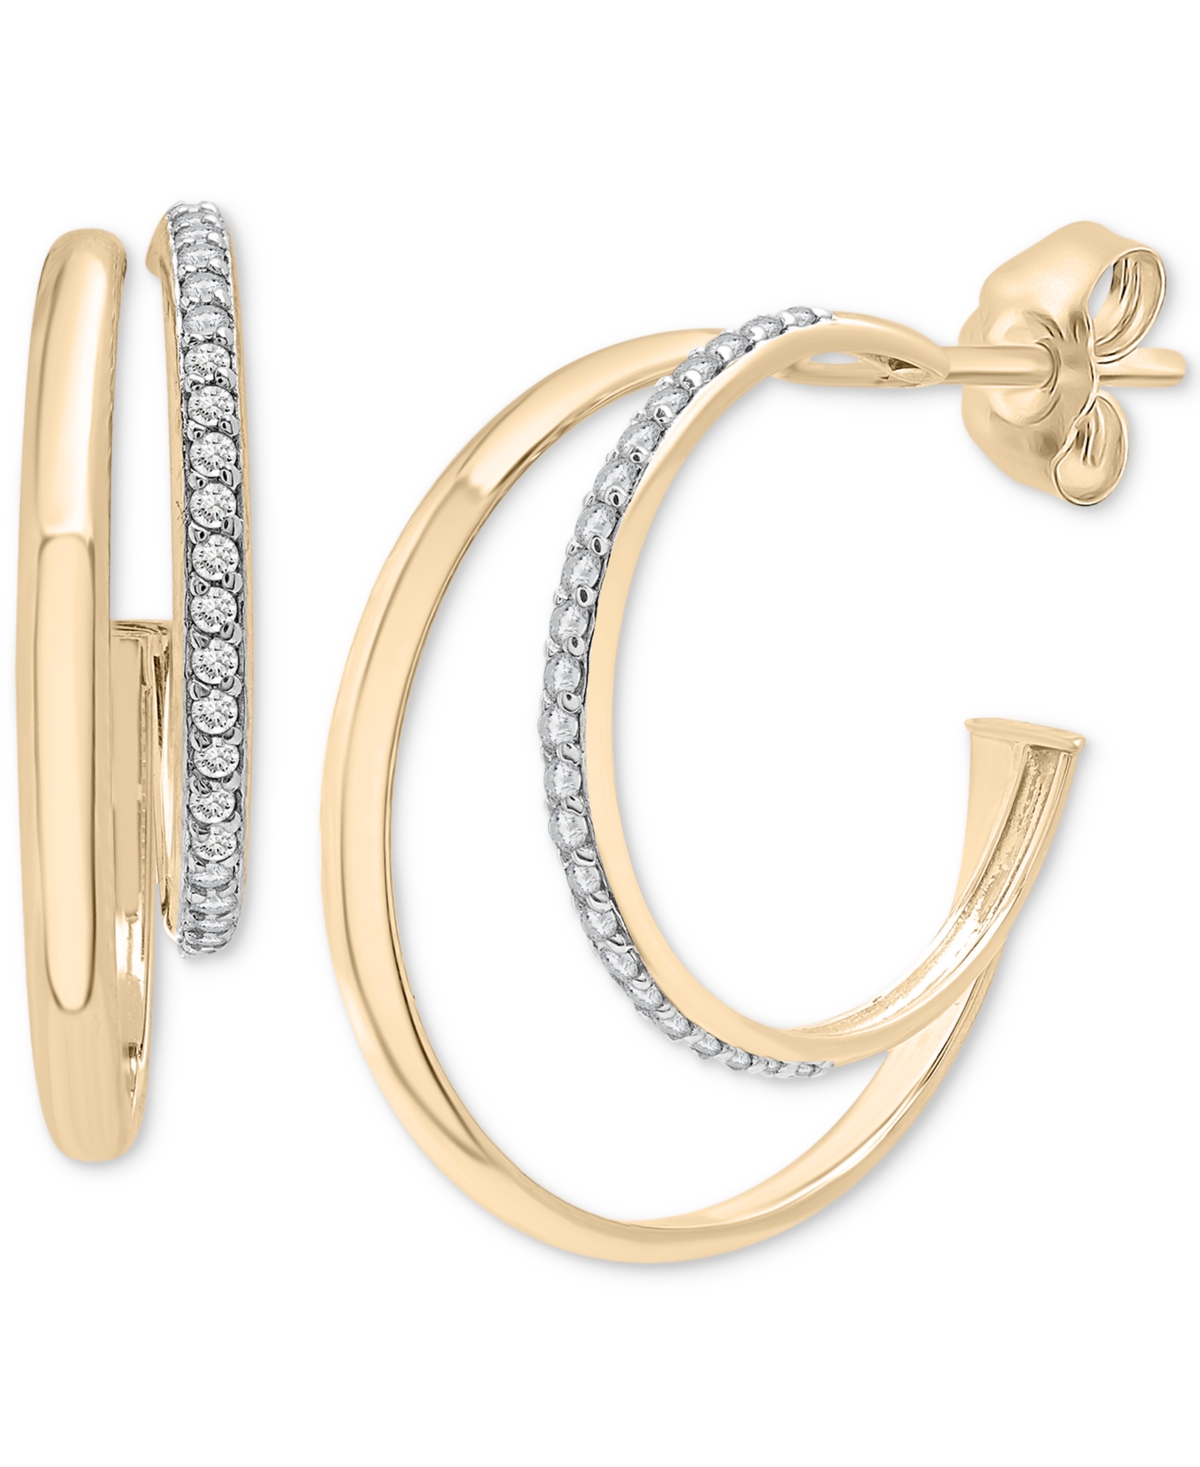 Shop Audrey By Aurate Diamond Double Small Hoop Earrings (1/4 Ct. T.w.) In Gold Vermeil, Created For Macy's